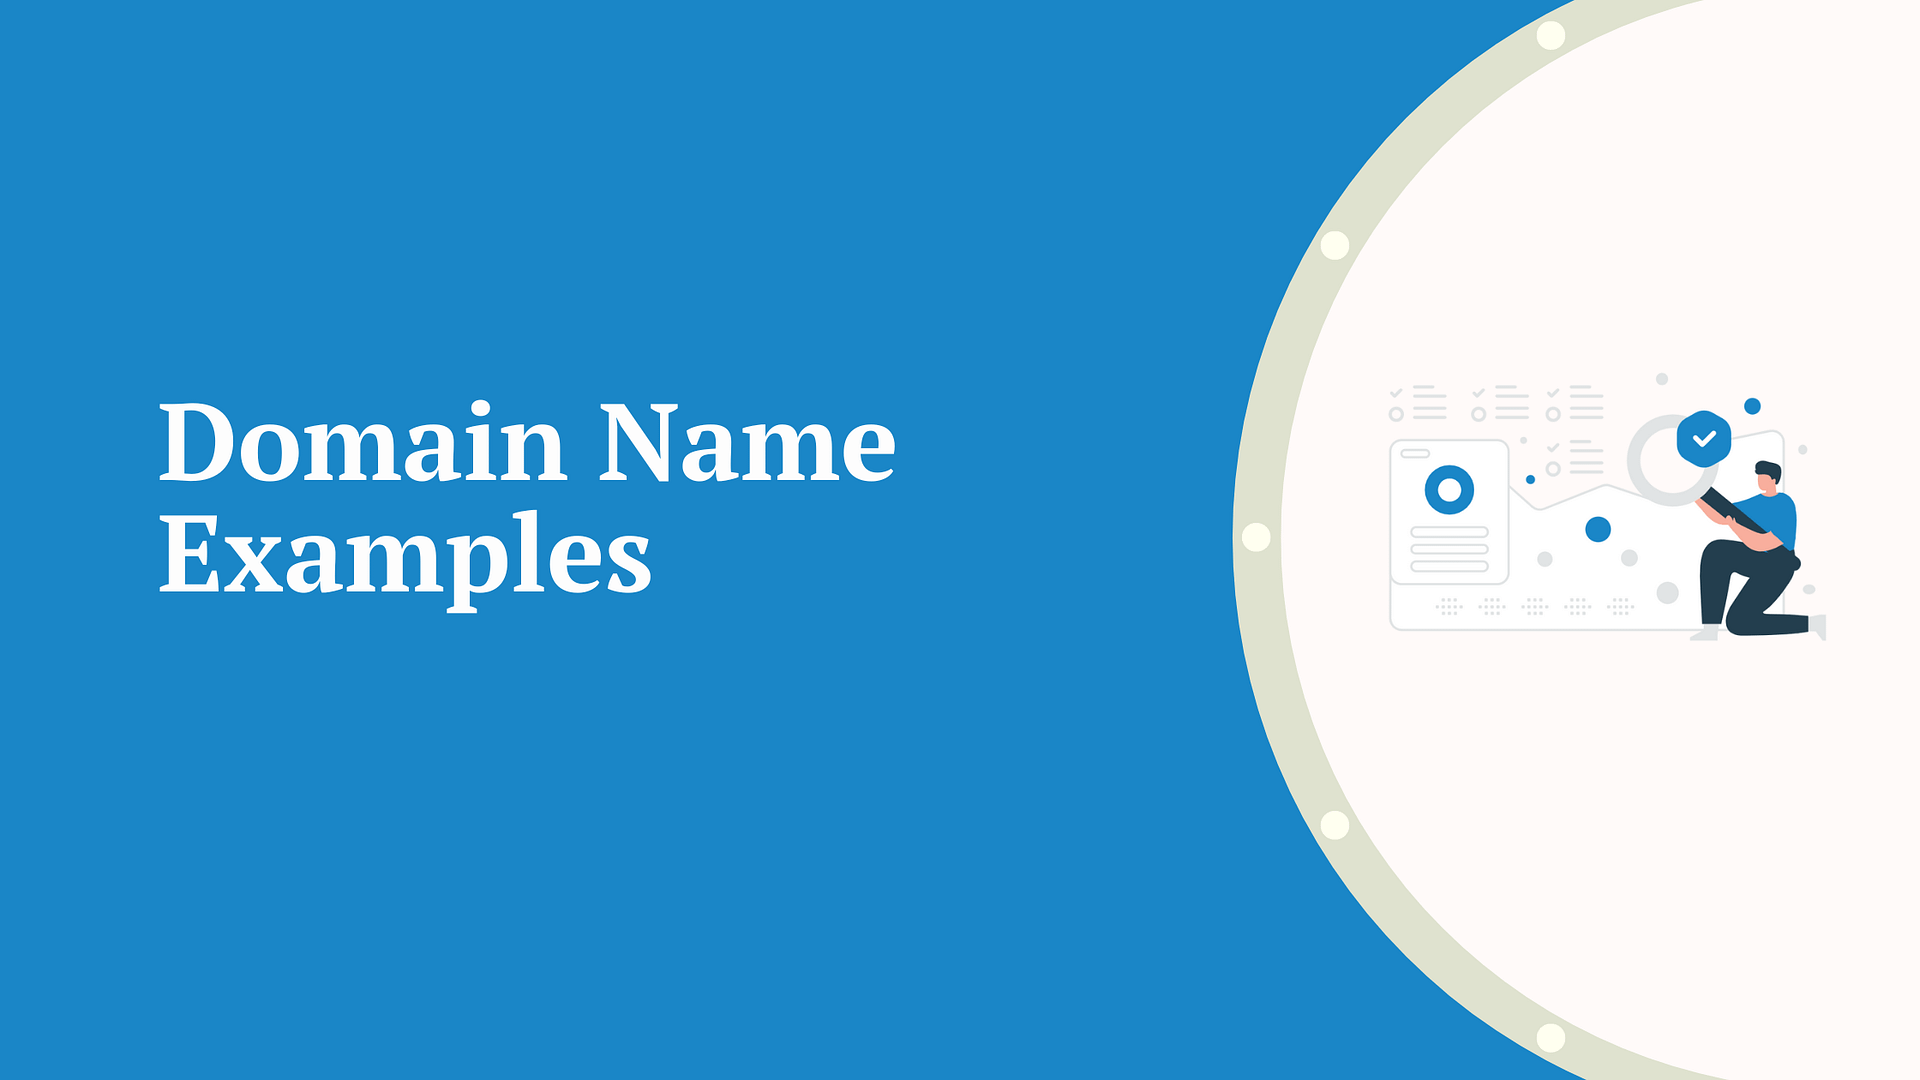 What Is a Domain Type? (Definition, 5 Types and Examples)